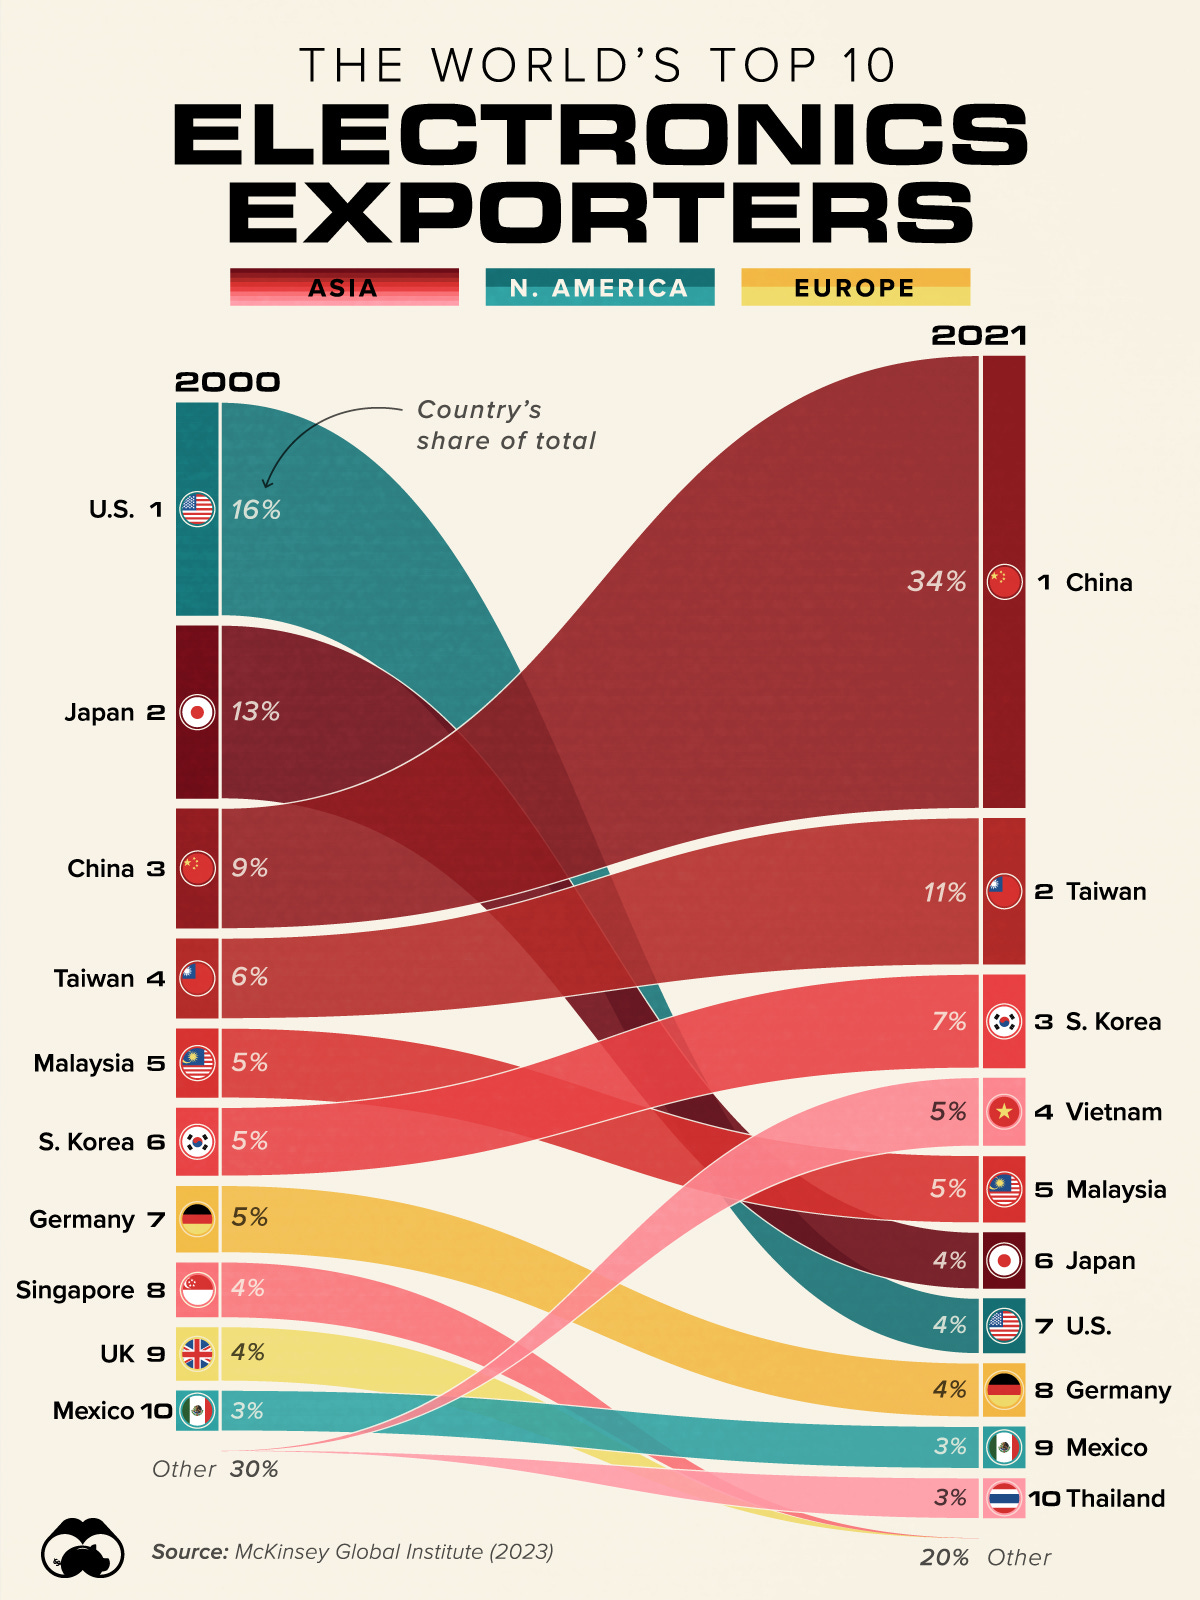 The Top 10 Electronics Exporters in the World